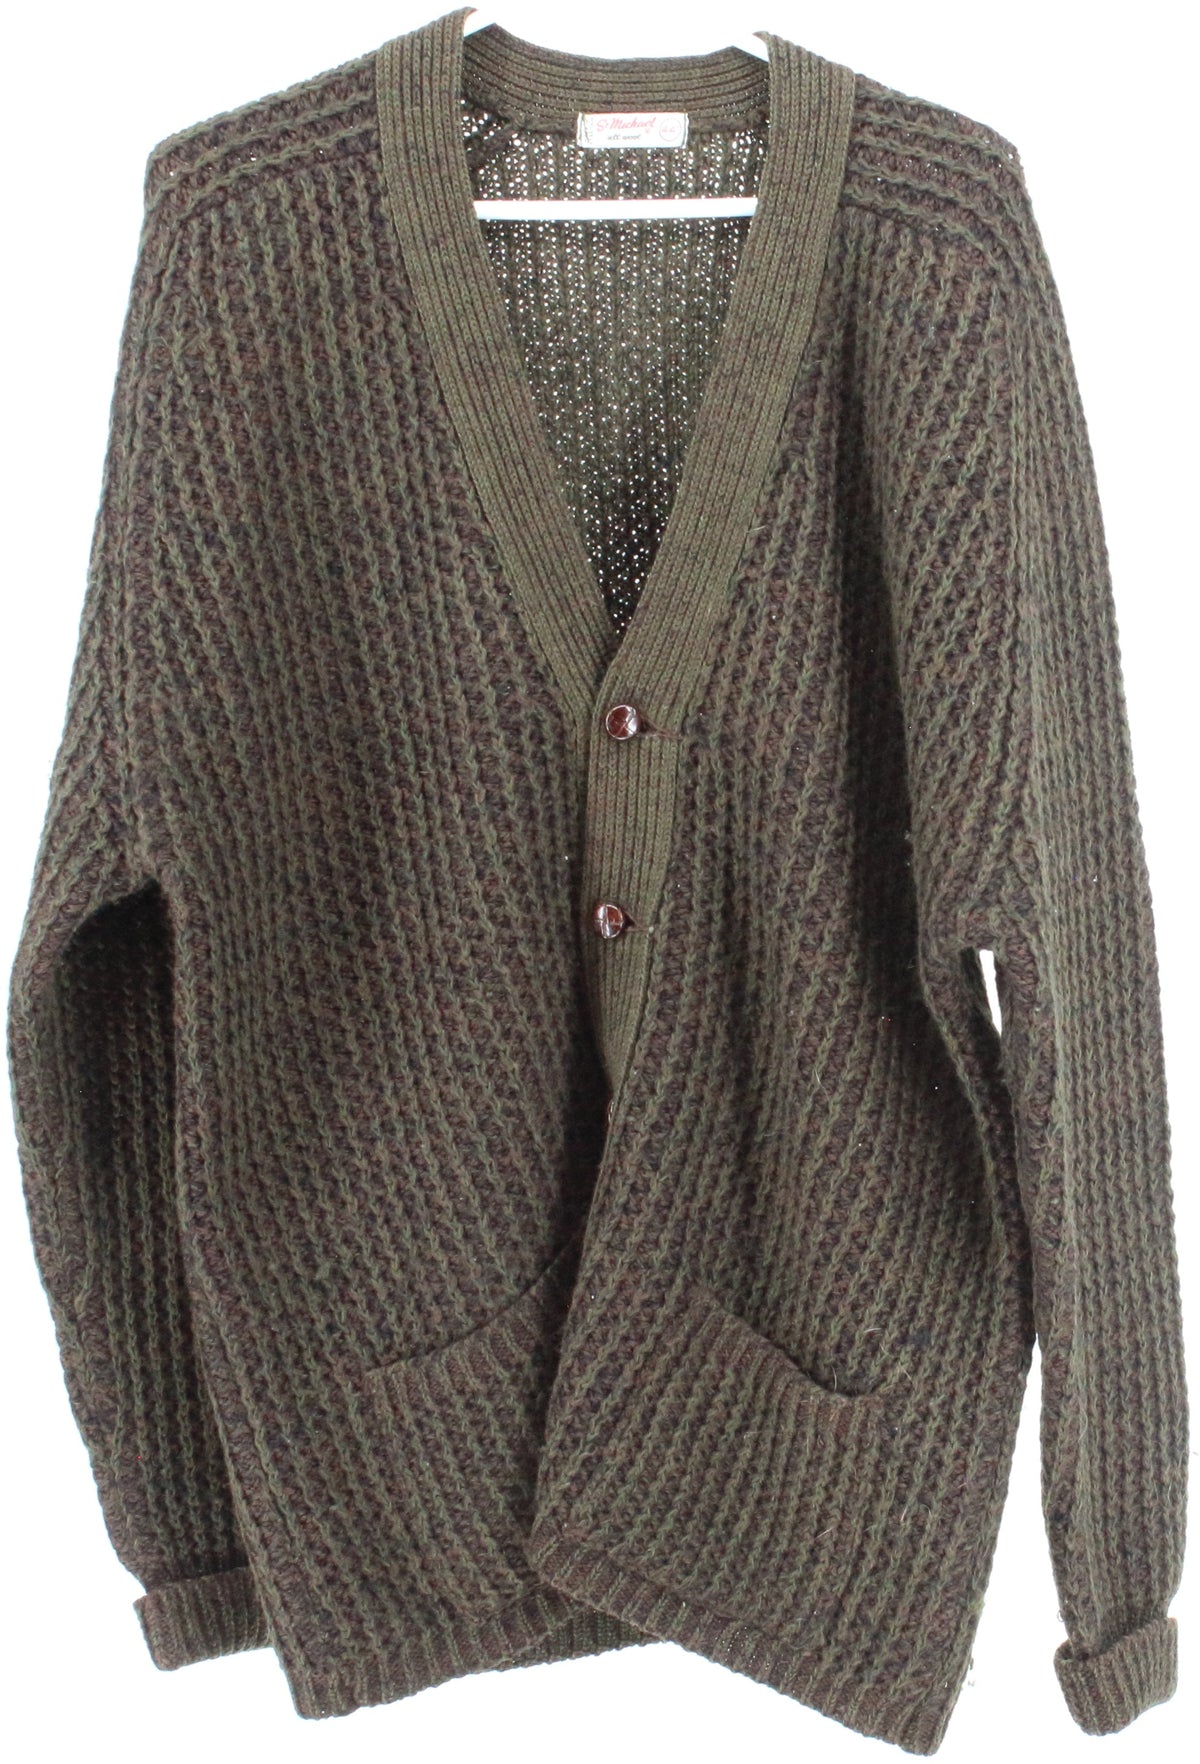 St Michael Green and Brown Wool Cardigan Sweater